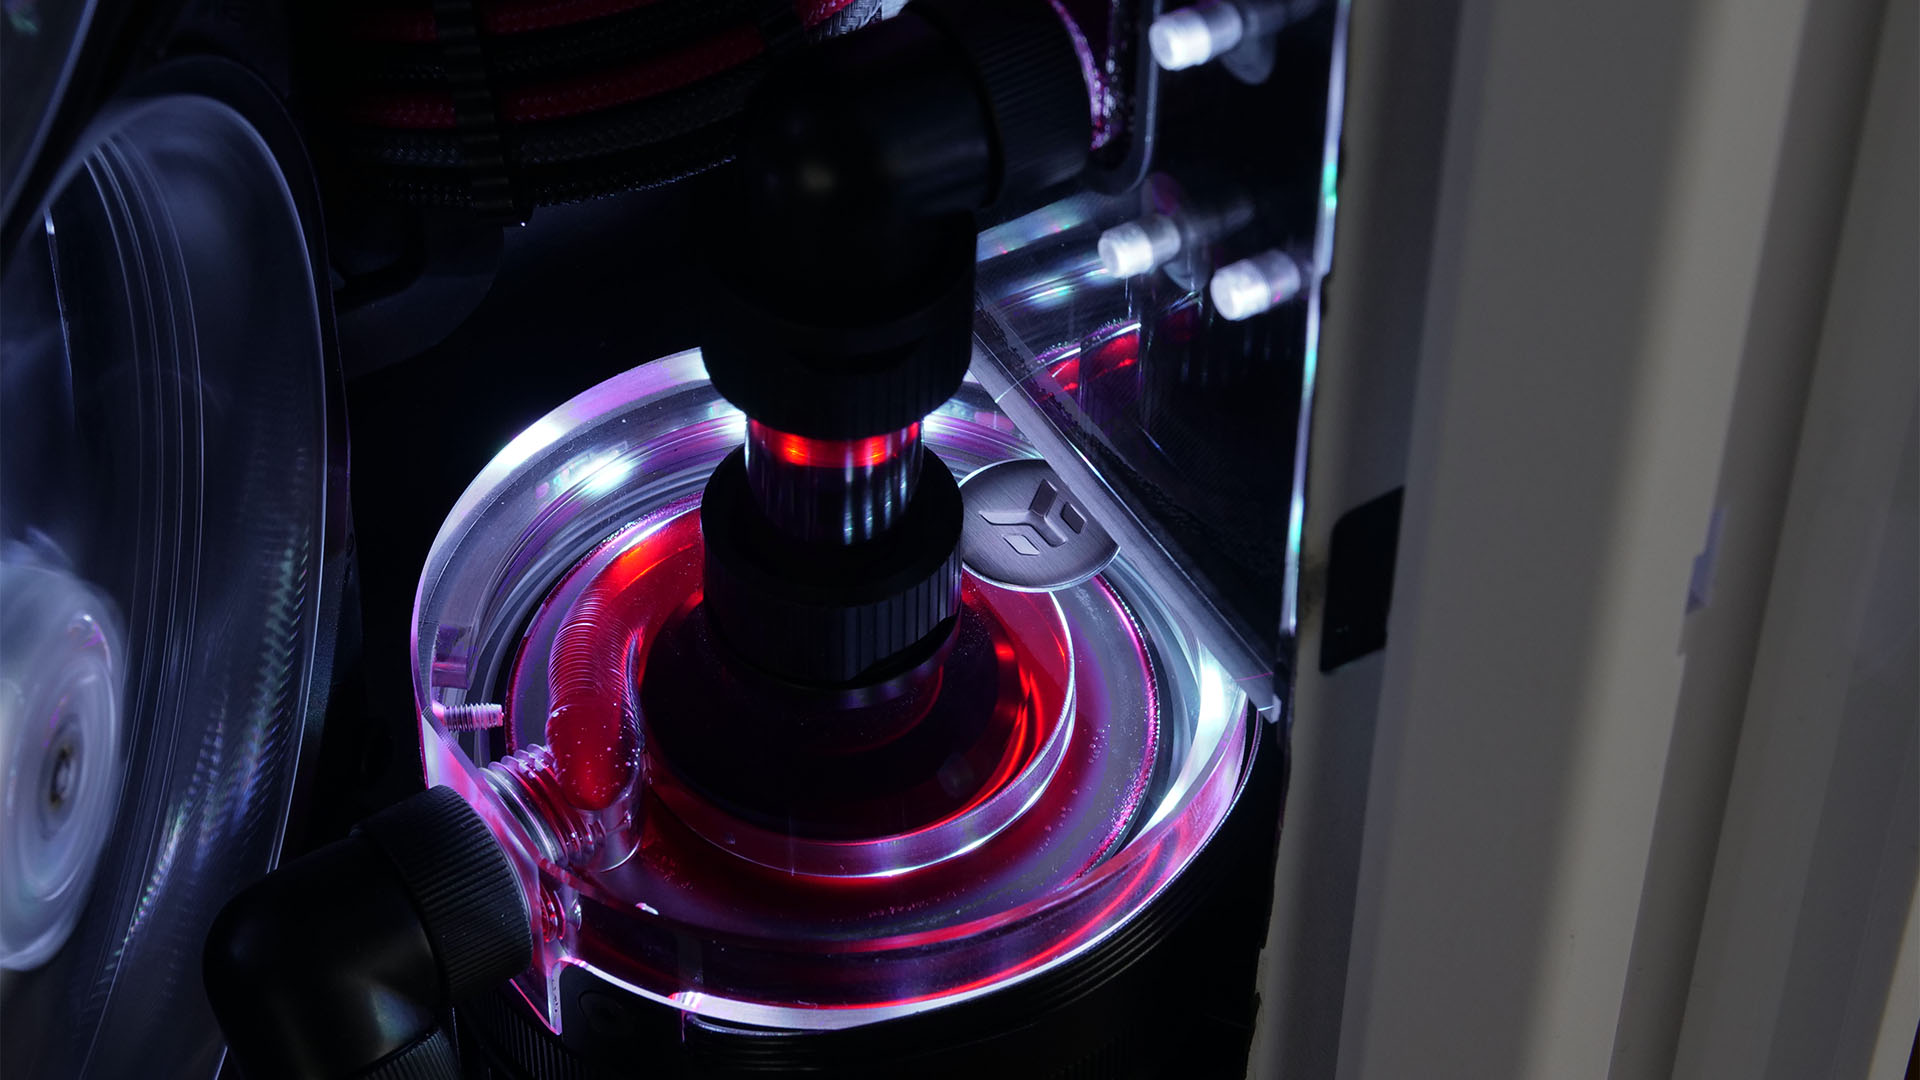 The unusual airflow system inside the tweaked meshify case